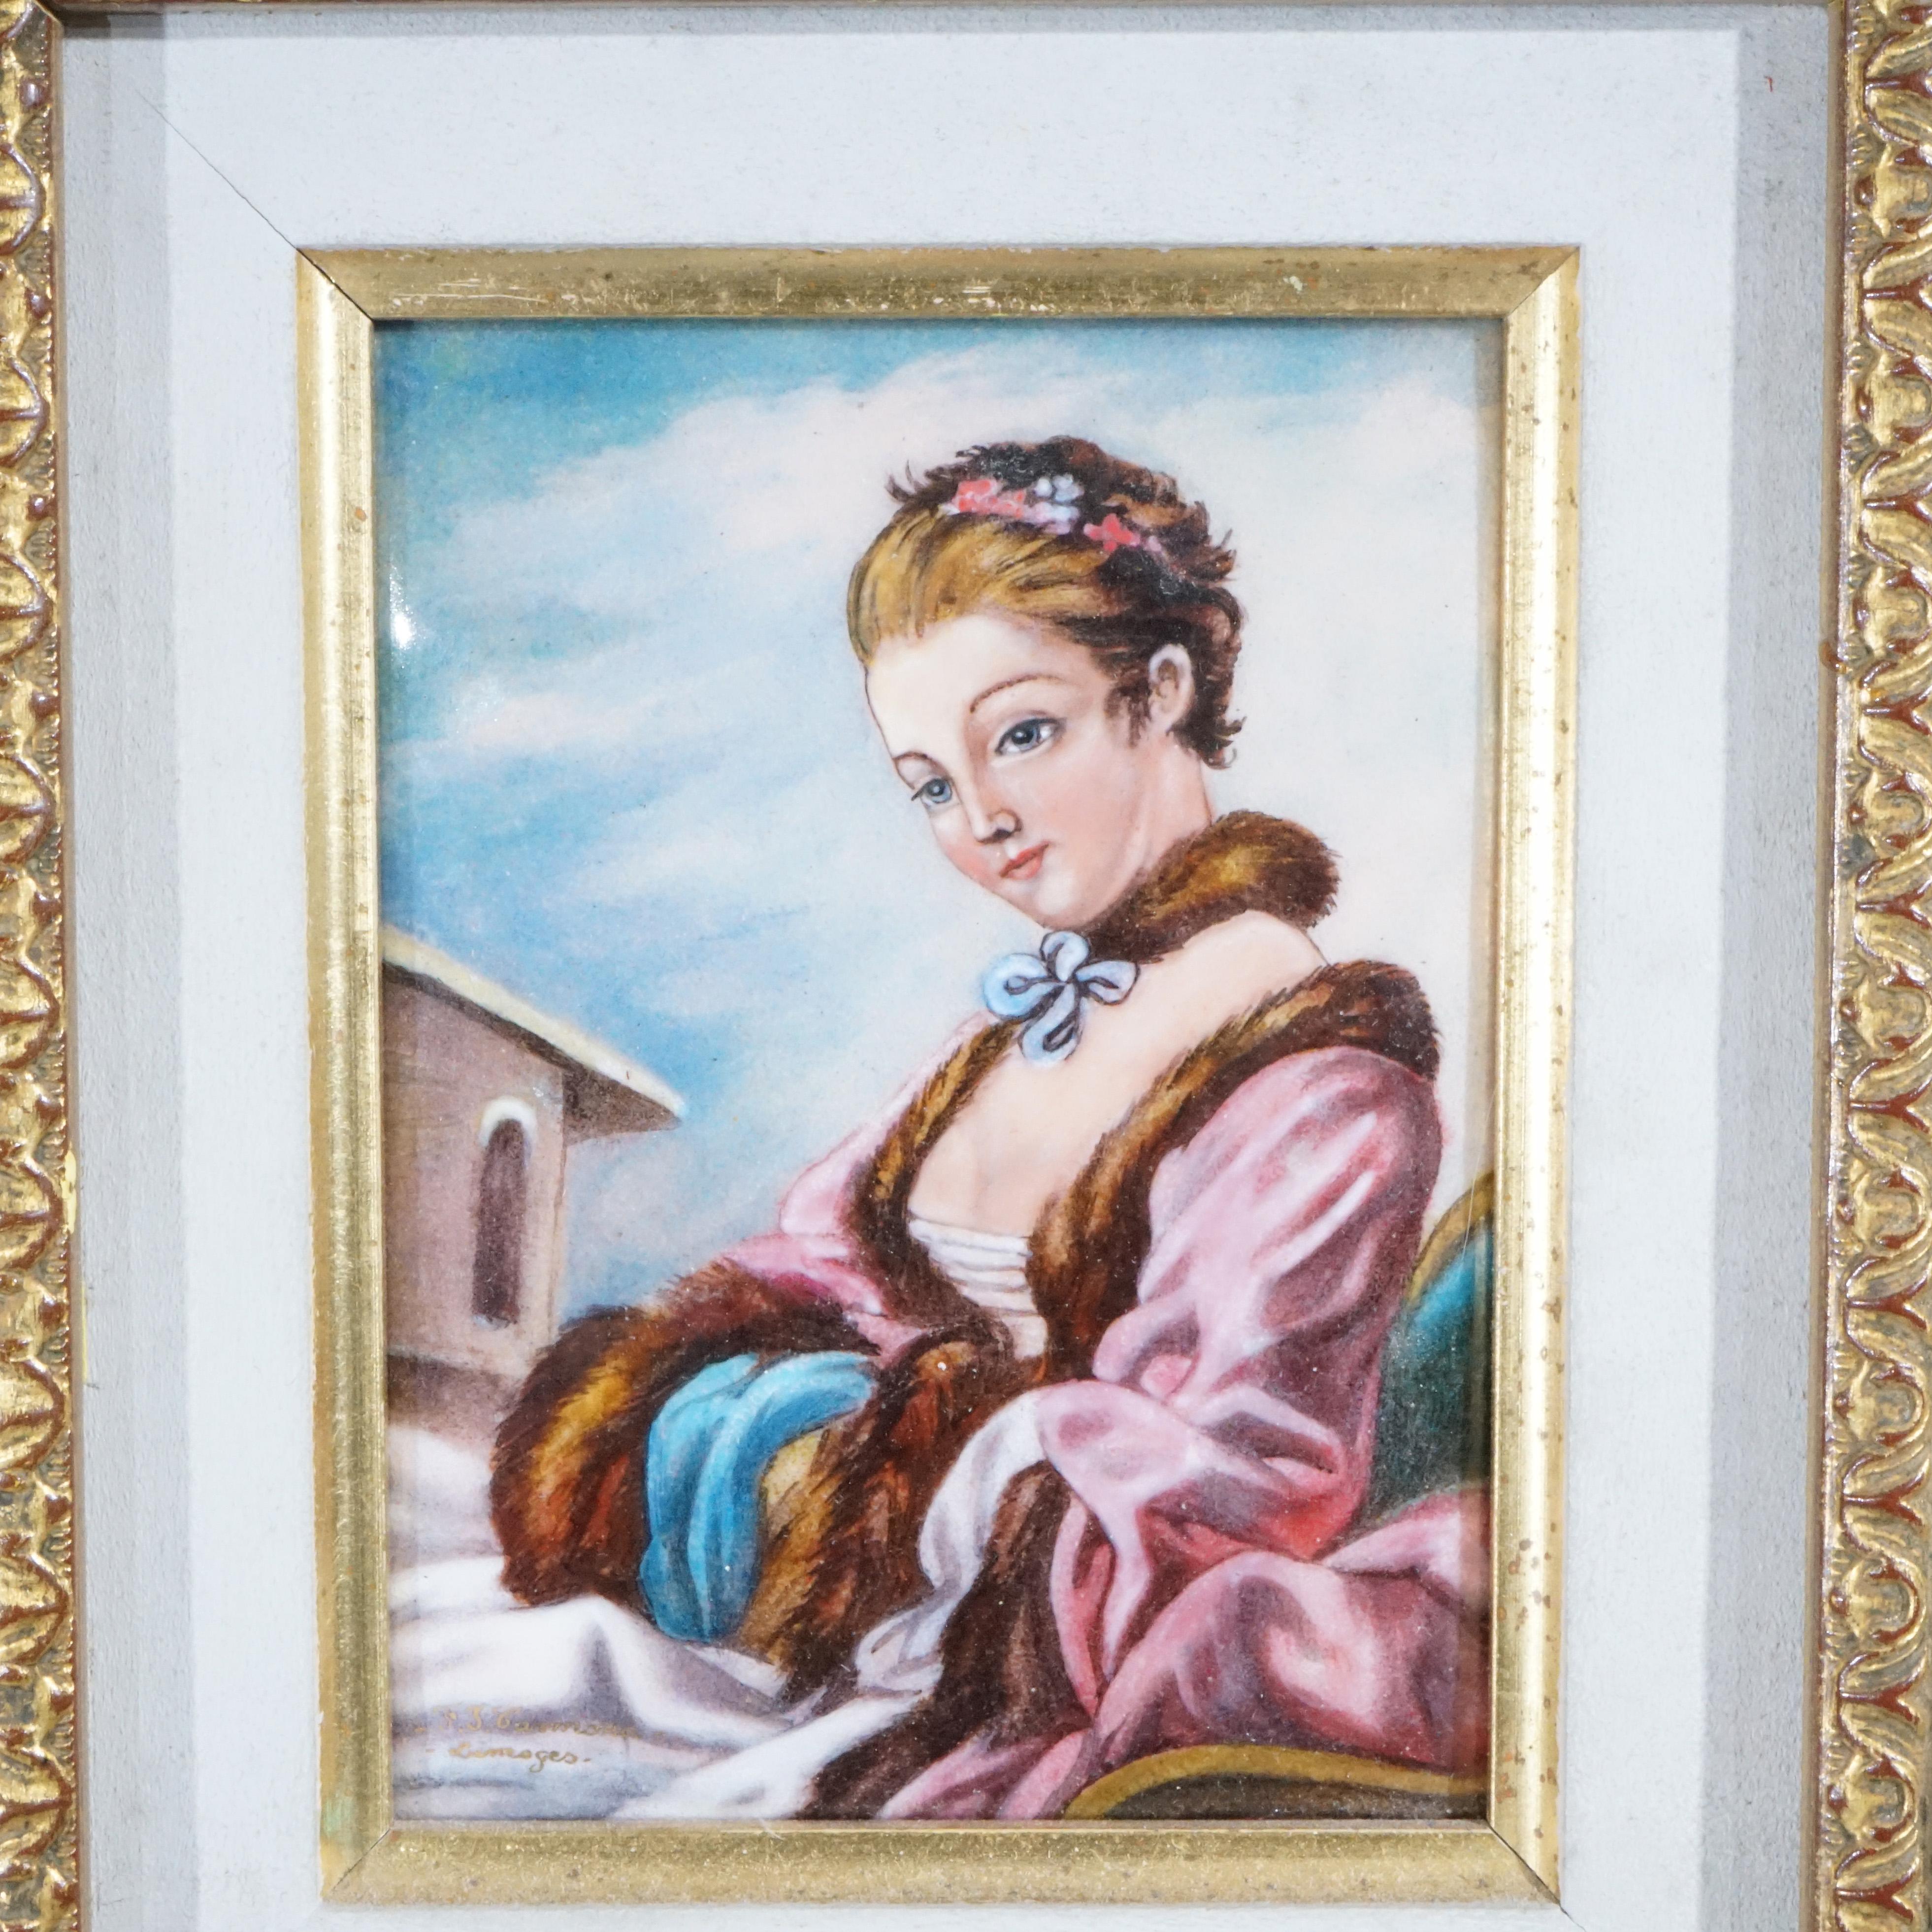 A French Limoges painting offers enamel on copper portrait of a woman in outdoor setting, seated in giltwood frame, 20th century.

Measures- 10.5'' H x 9.5'' W x 1.75'' D; 2 sites; sight 5'' H x 3.75'', 7'' H x 5.75''.